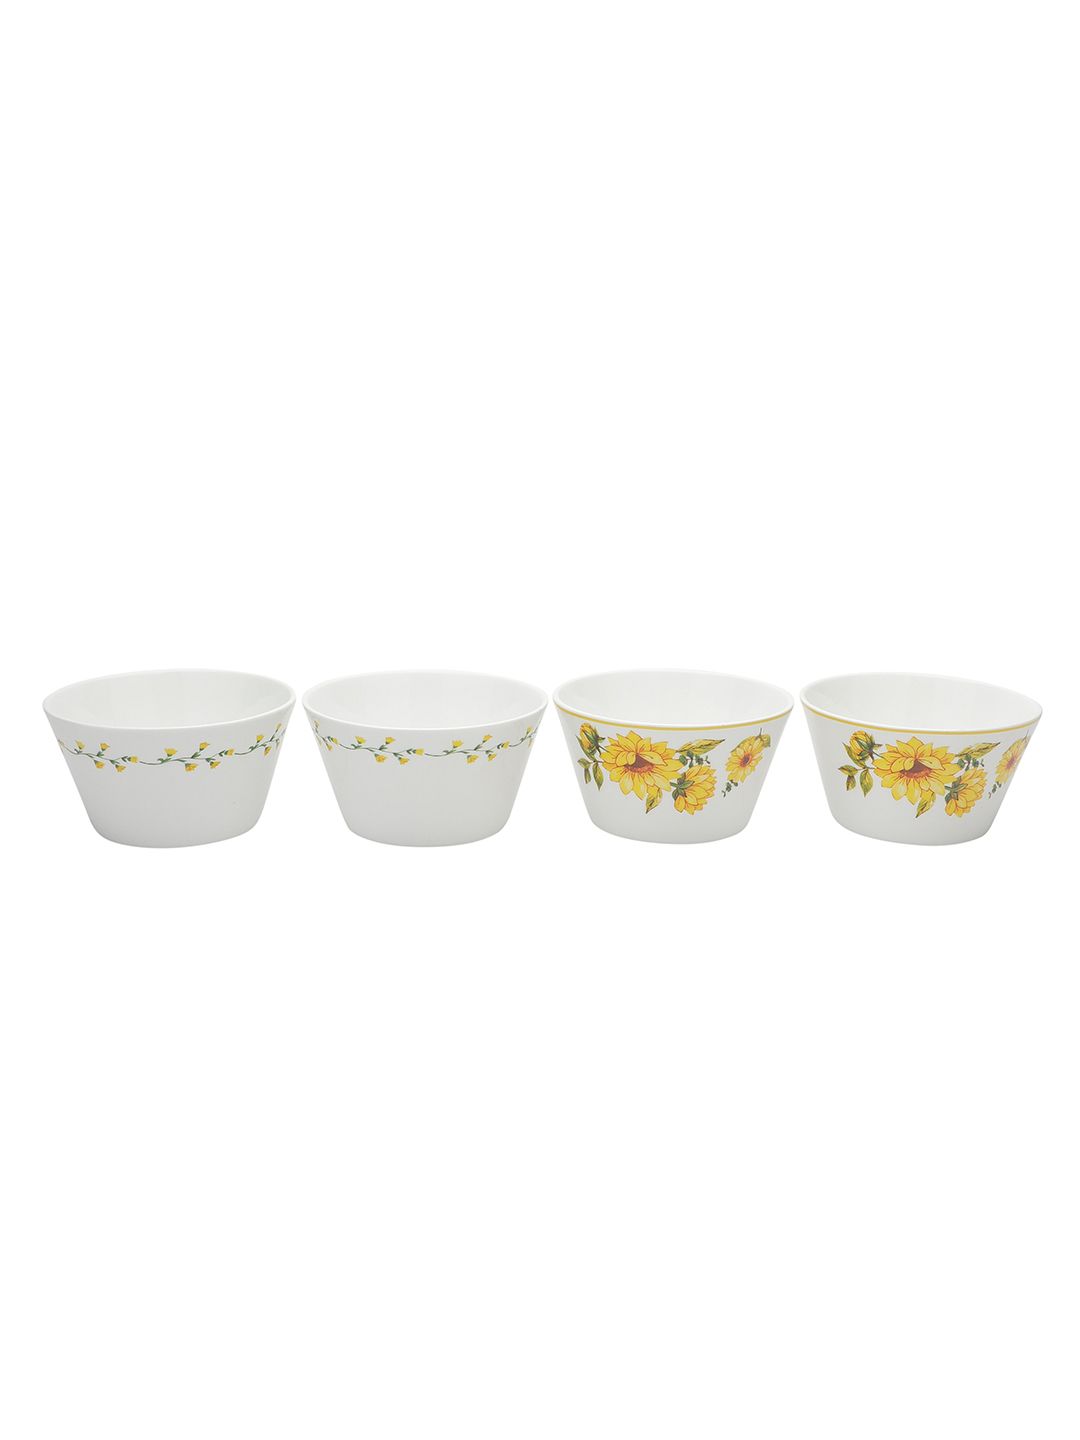 CLAY CRAFT White & Yellow 4 Pieces Floral Printed Ceramic Glossy Bowls Price in India